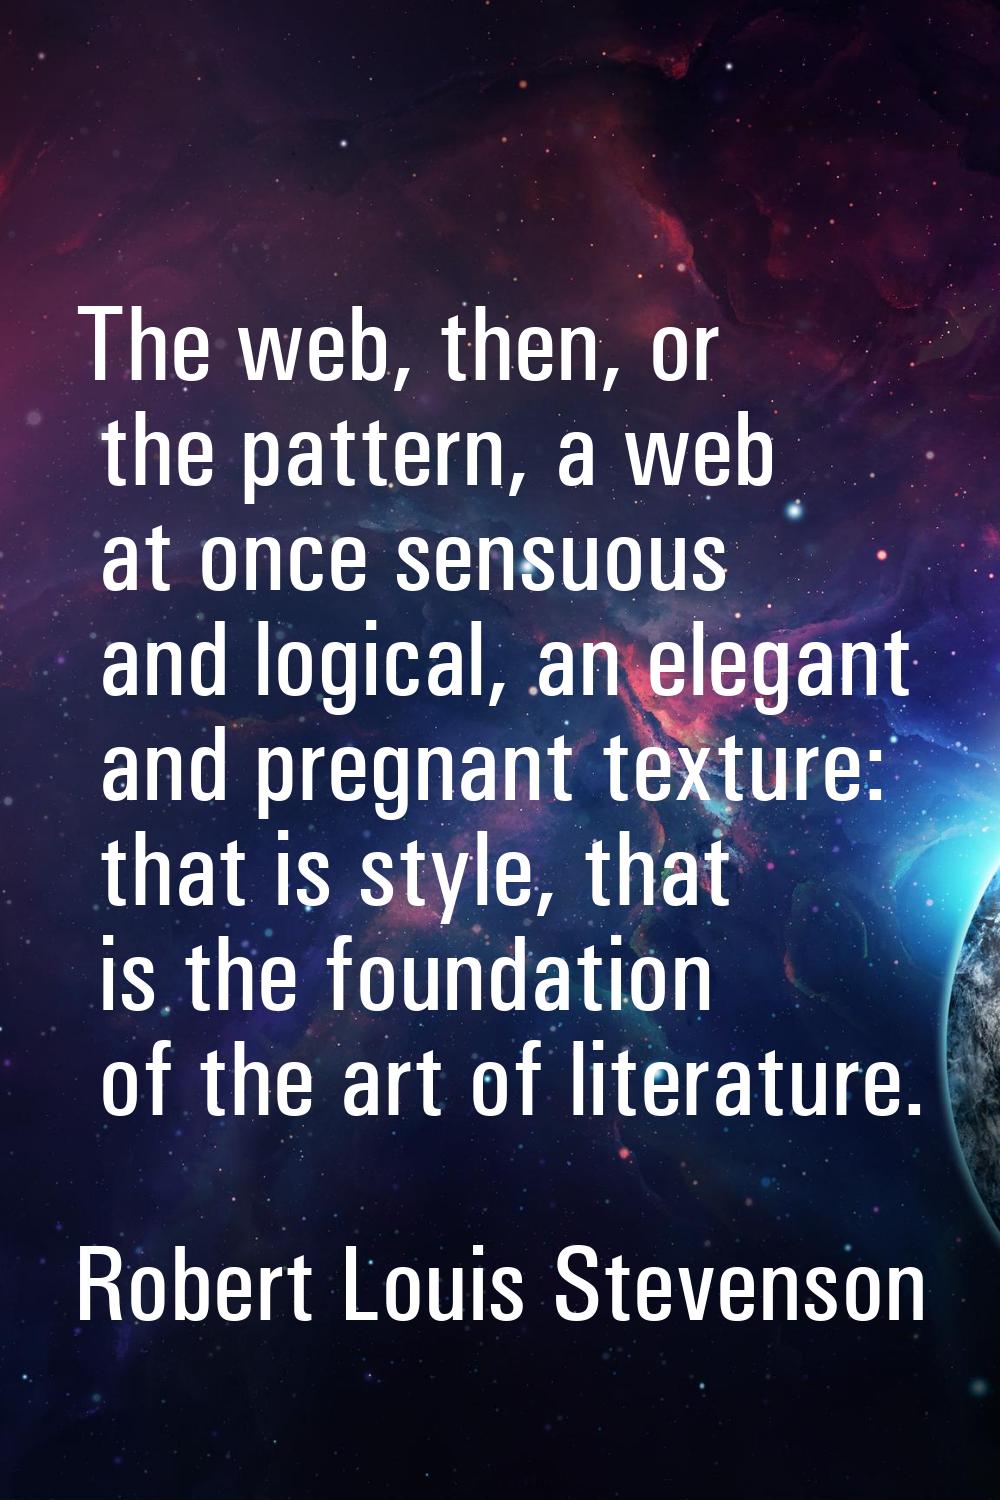 The web, then, or the pattern, a web at once sensuous and logical, an elegant and pregnant texture: